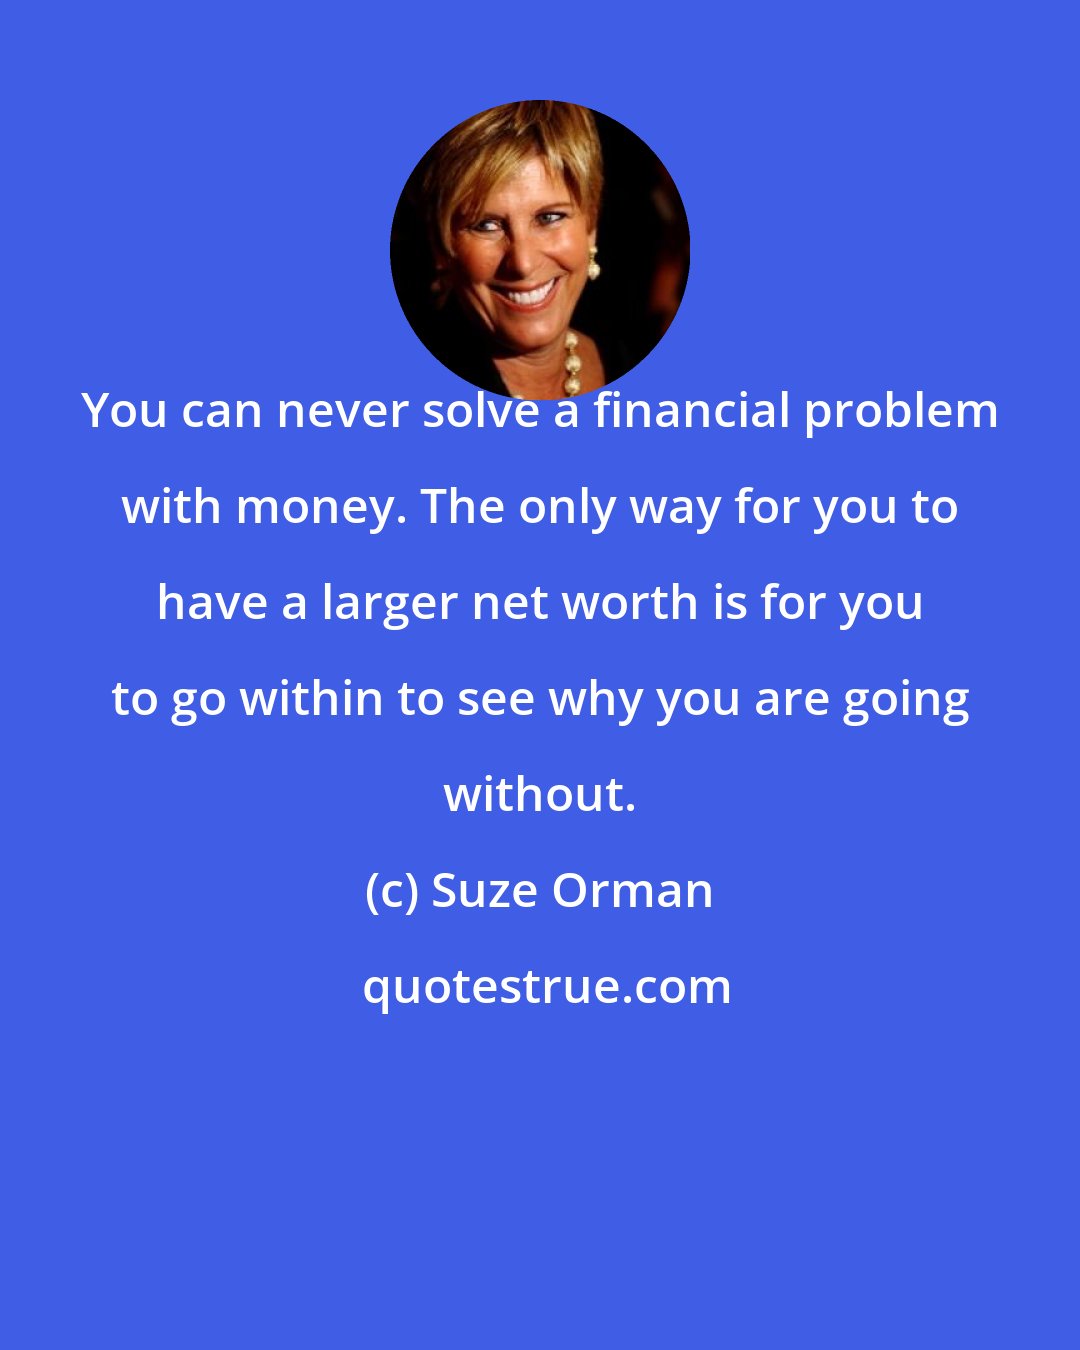 Suze Orman: You can never solve a financial problem with money. The only way for you to have a larger net worth is for you to go within to see why you are going without.